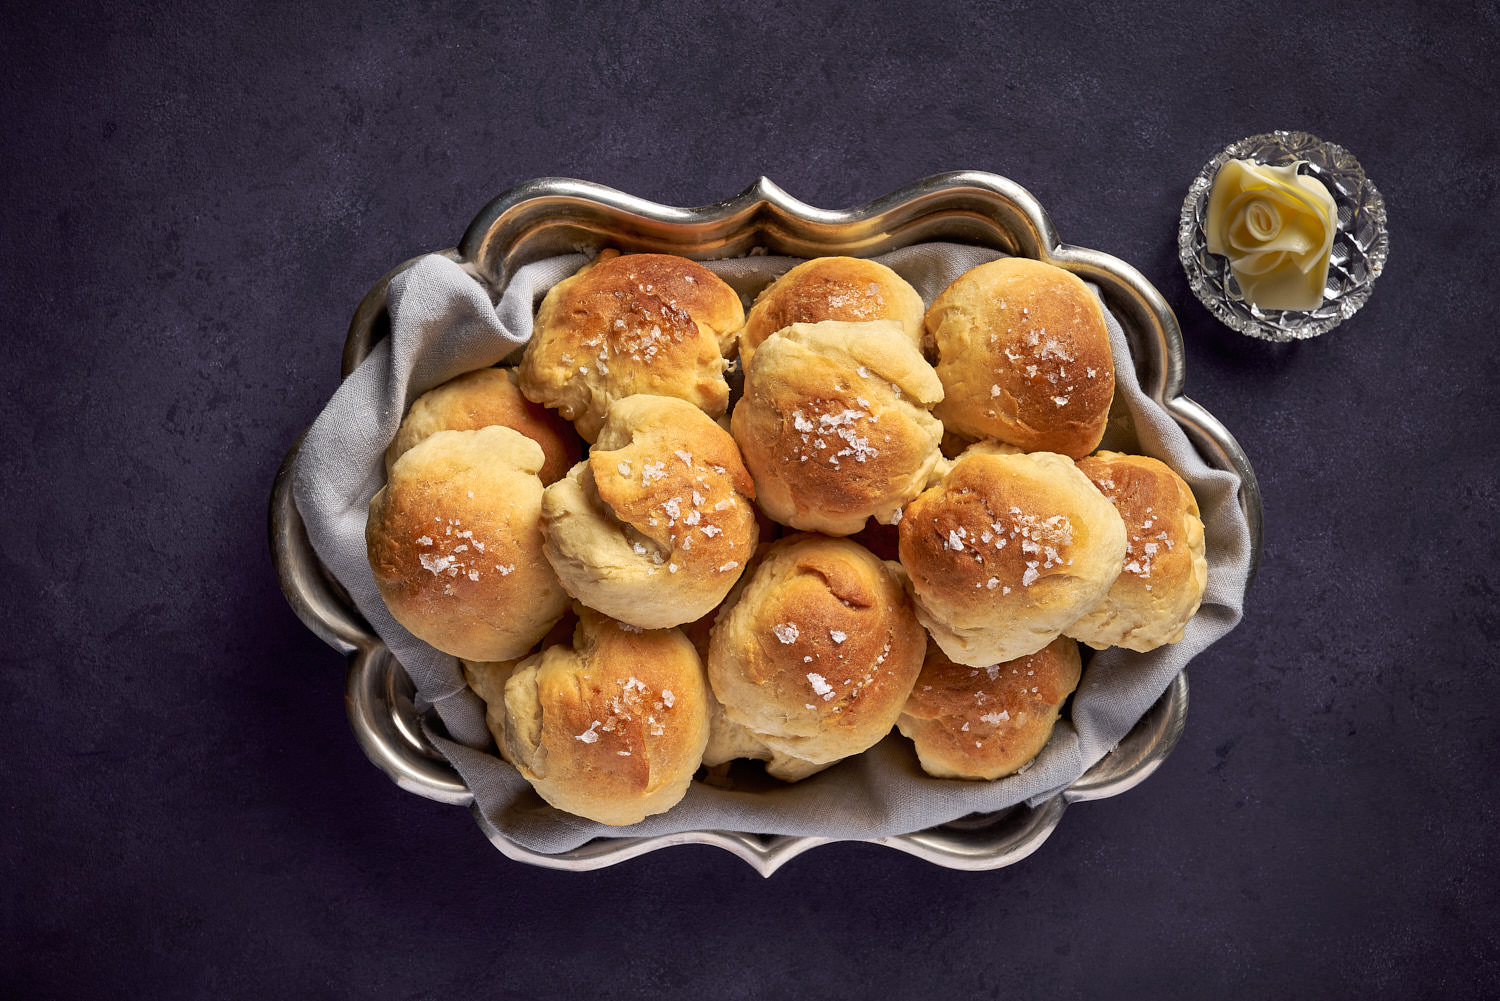 Editorial Cookbook Food Photography of Classic Dinner rolls